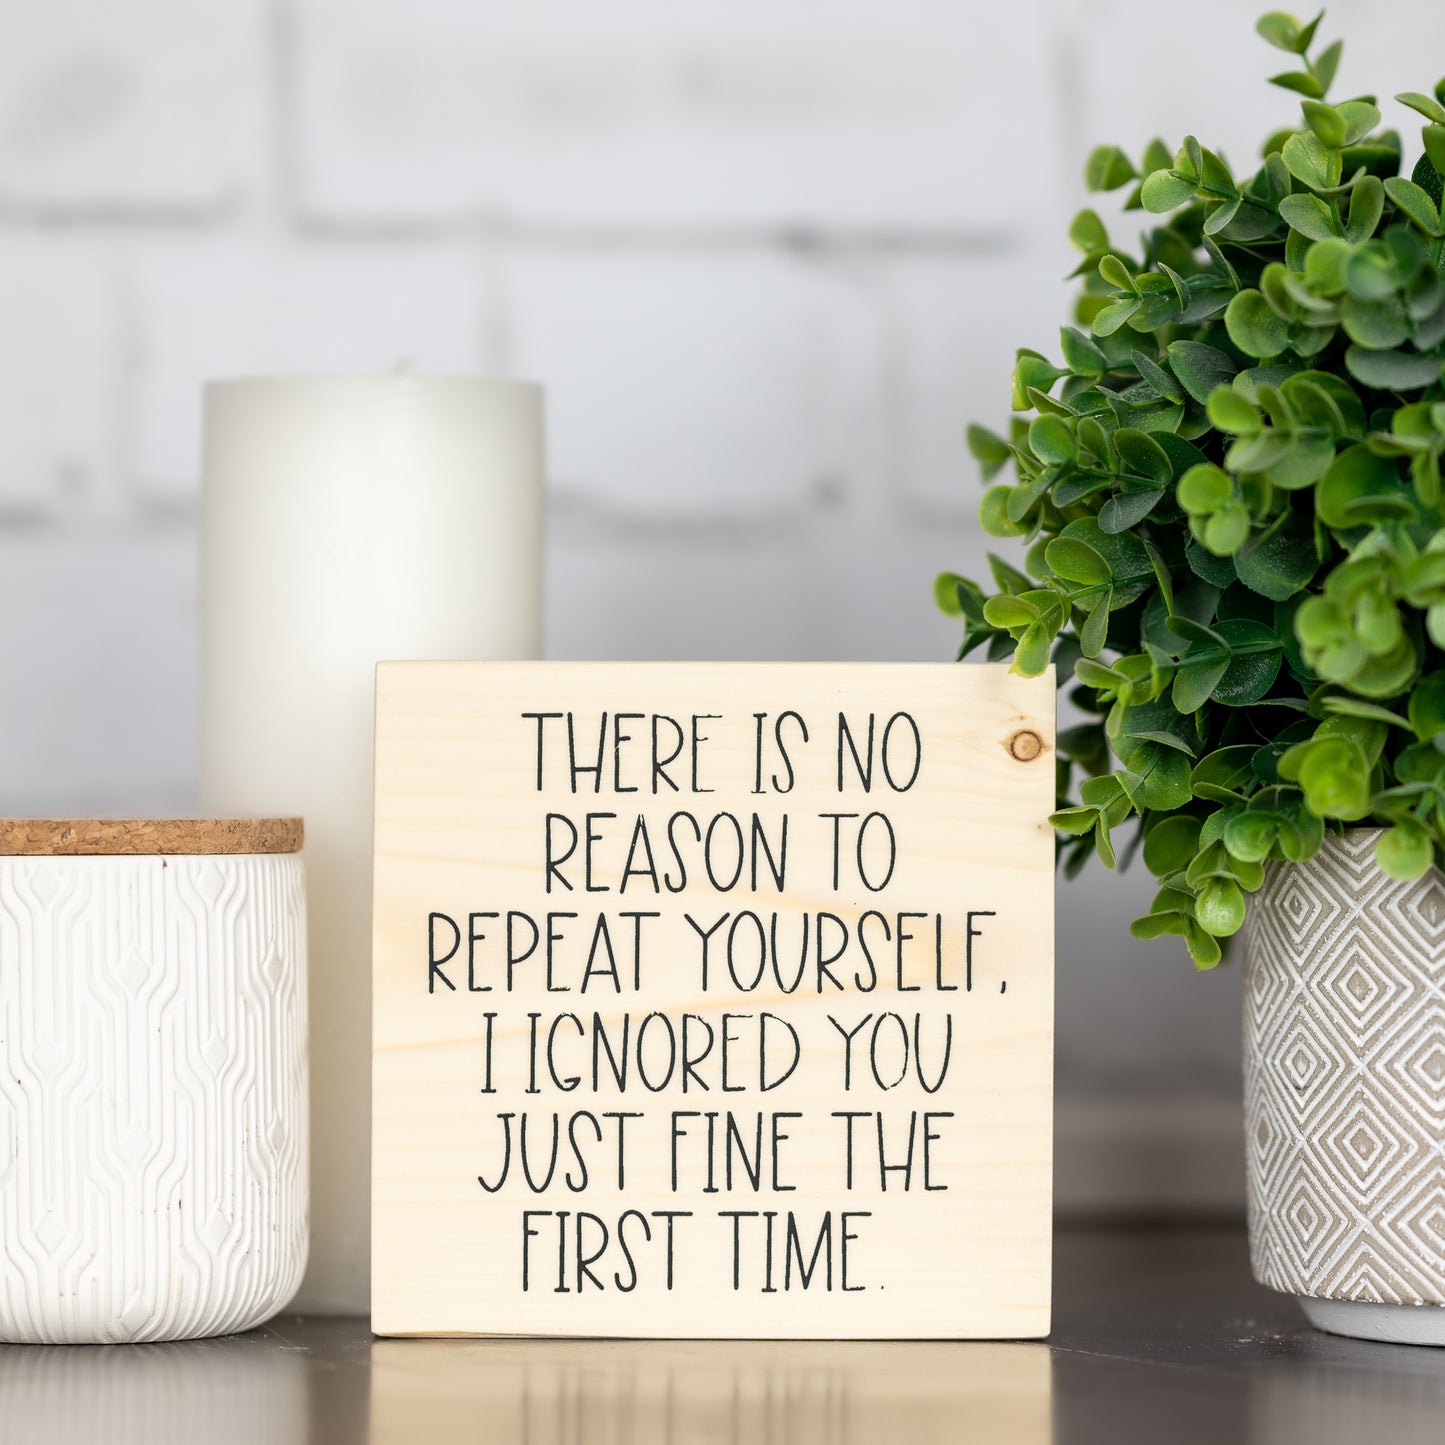 there is no reason to repeat yourself, i ignored you just fine the first time ~ wood block sign